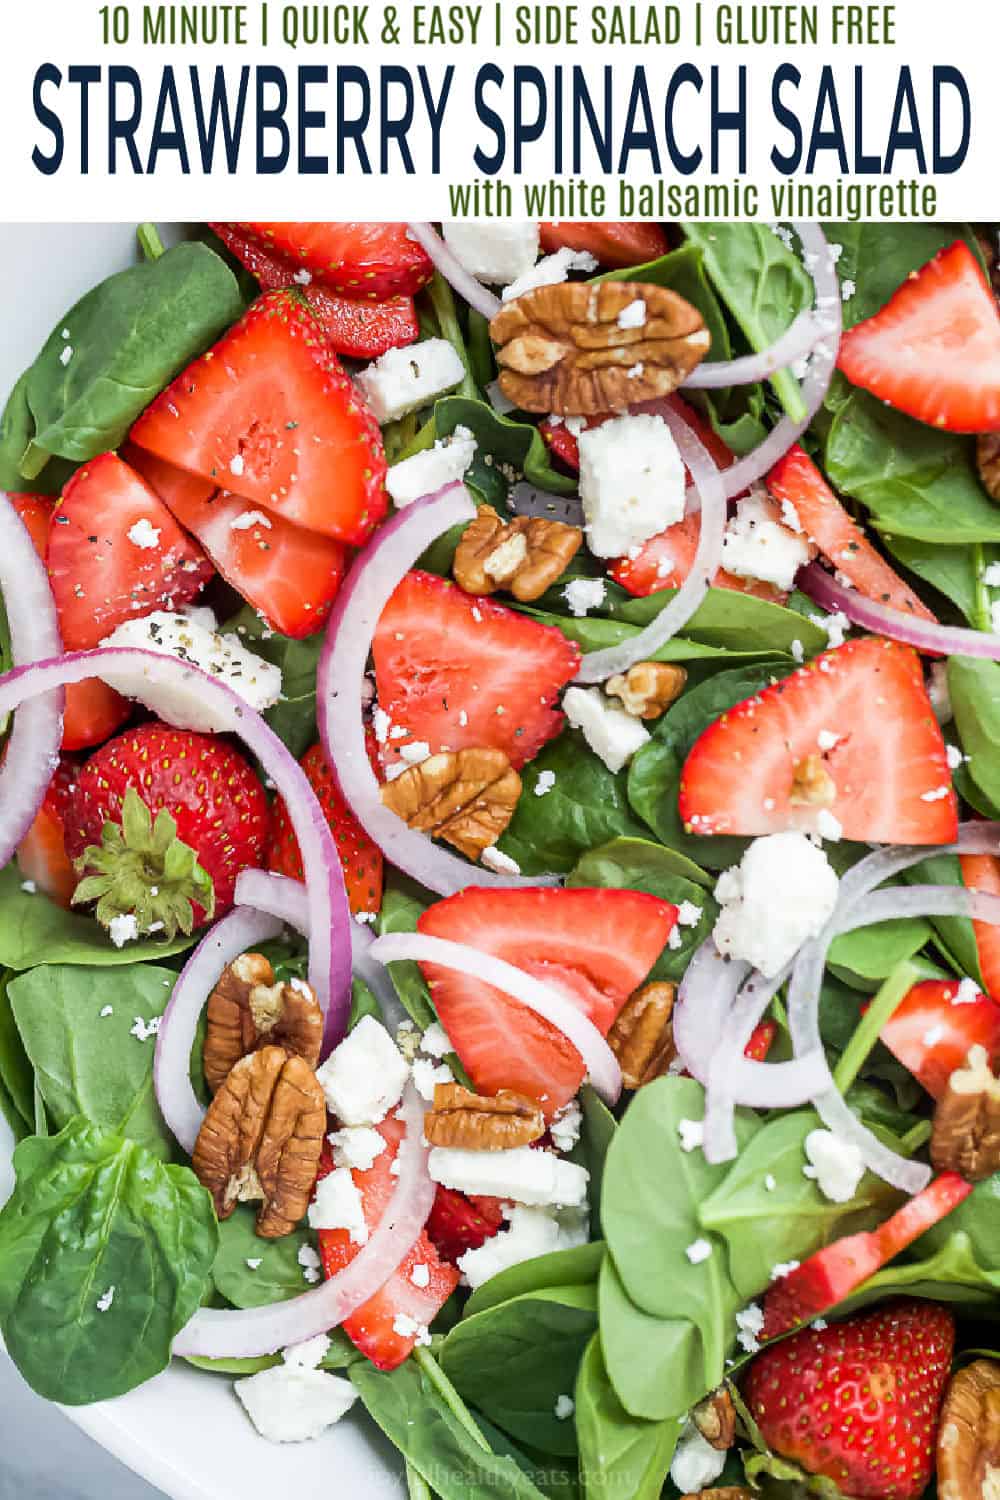 Easy 10 Minute Strawberry Spinach Salad | Spinach Salad Recipe